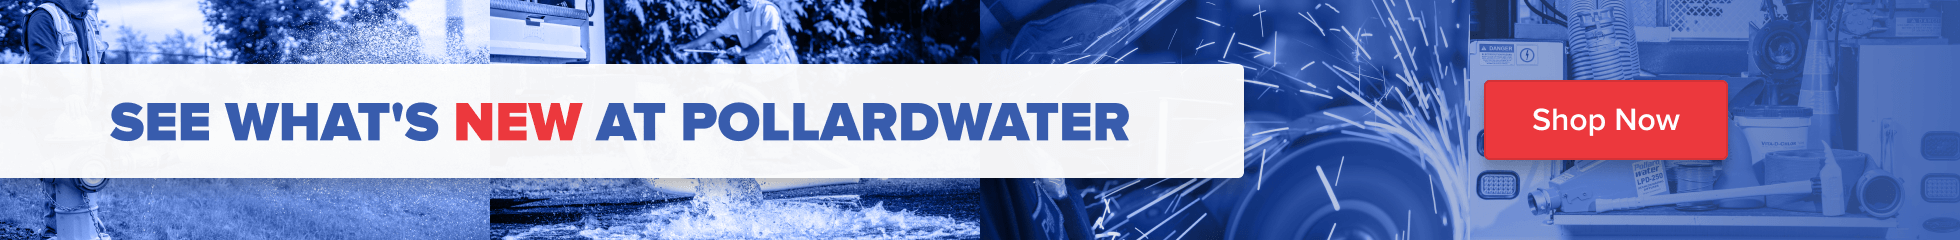 See what's new at Pollardwater